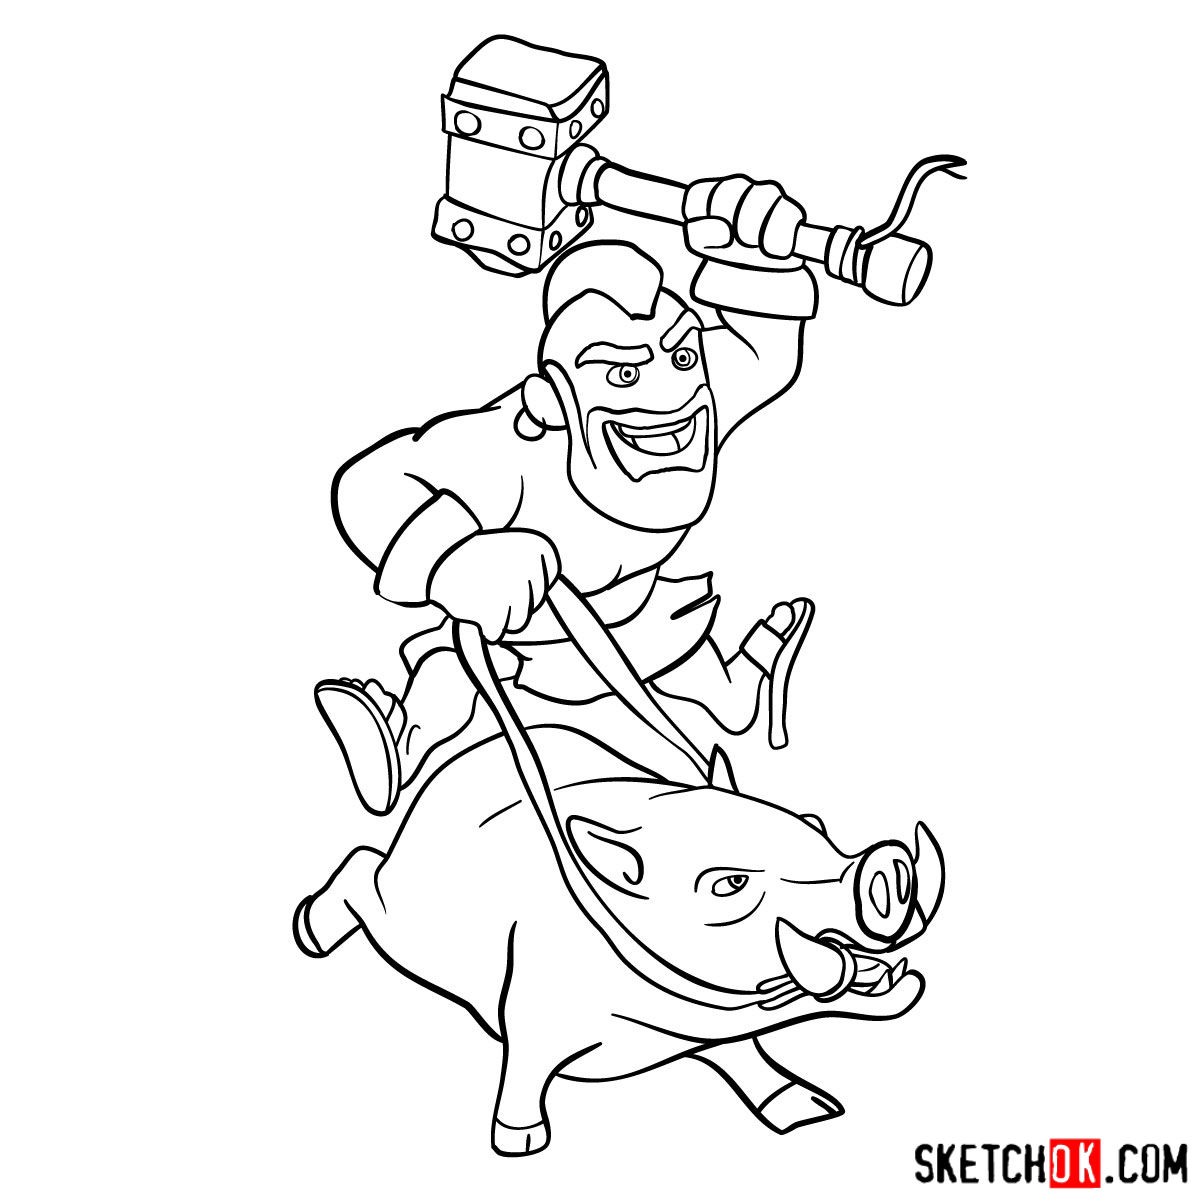 How to draw Hog Rider from Clash of Clans - step 15